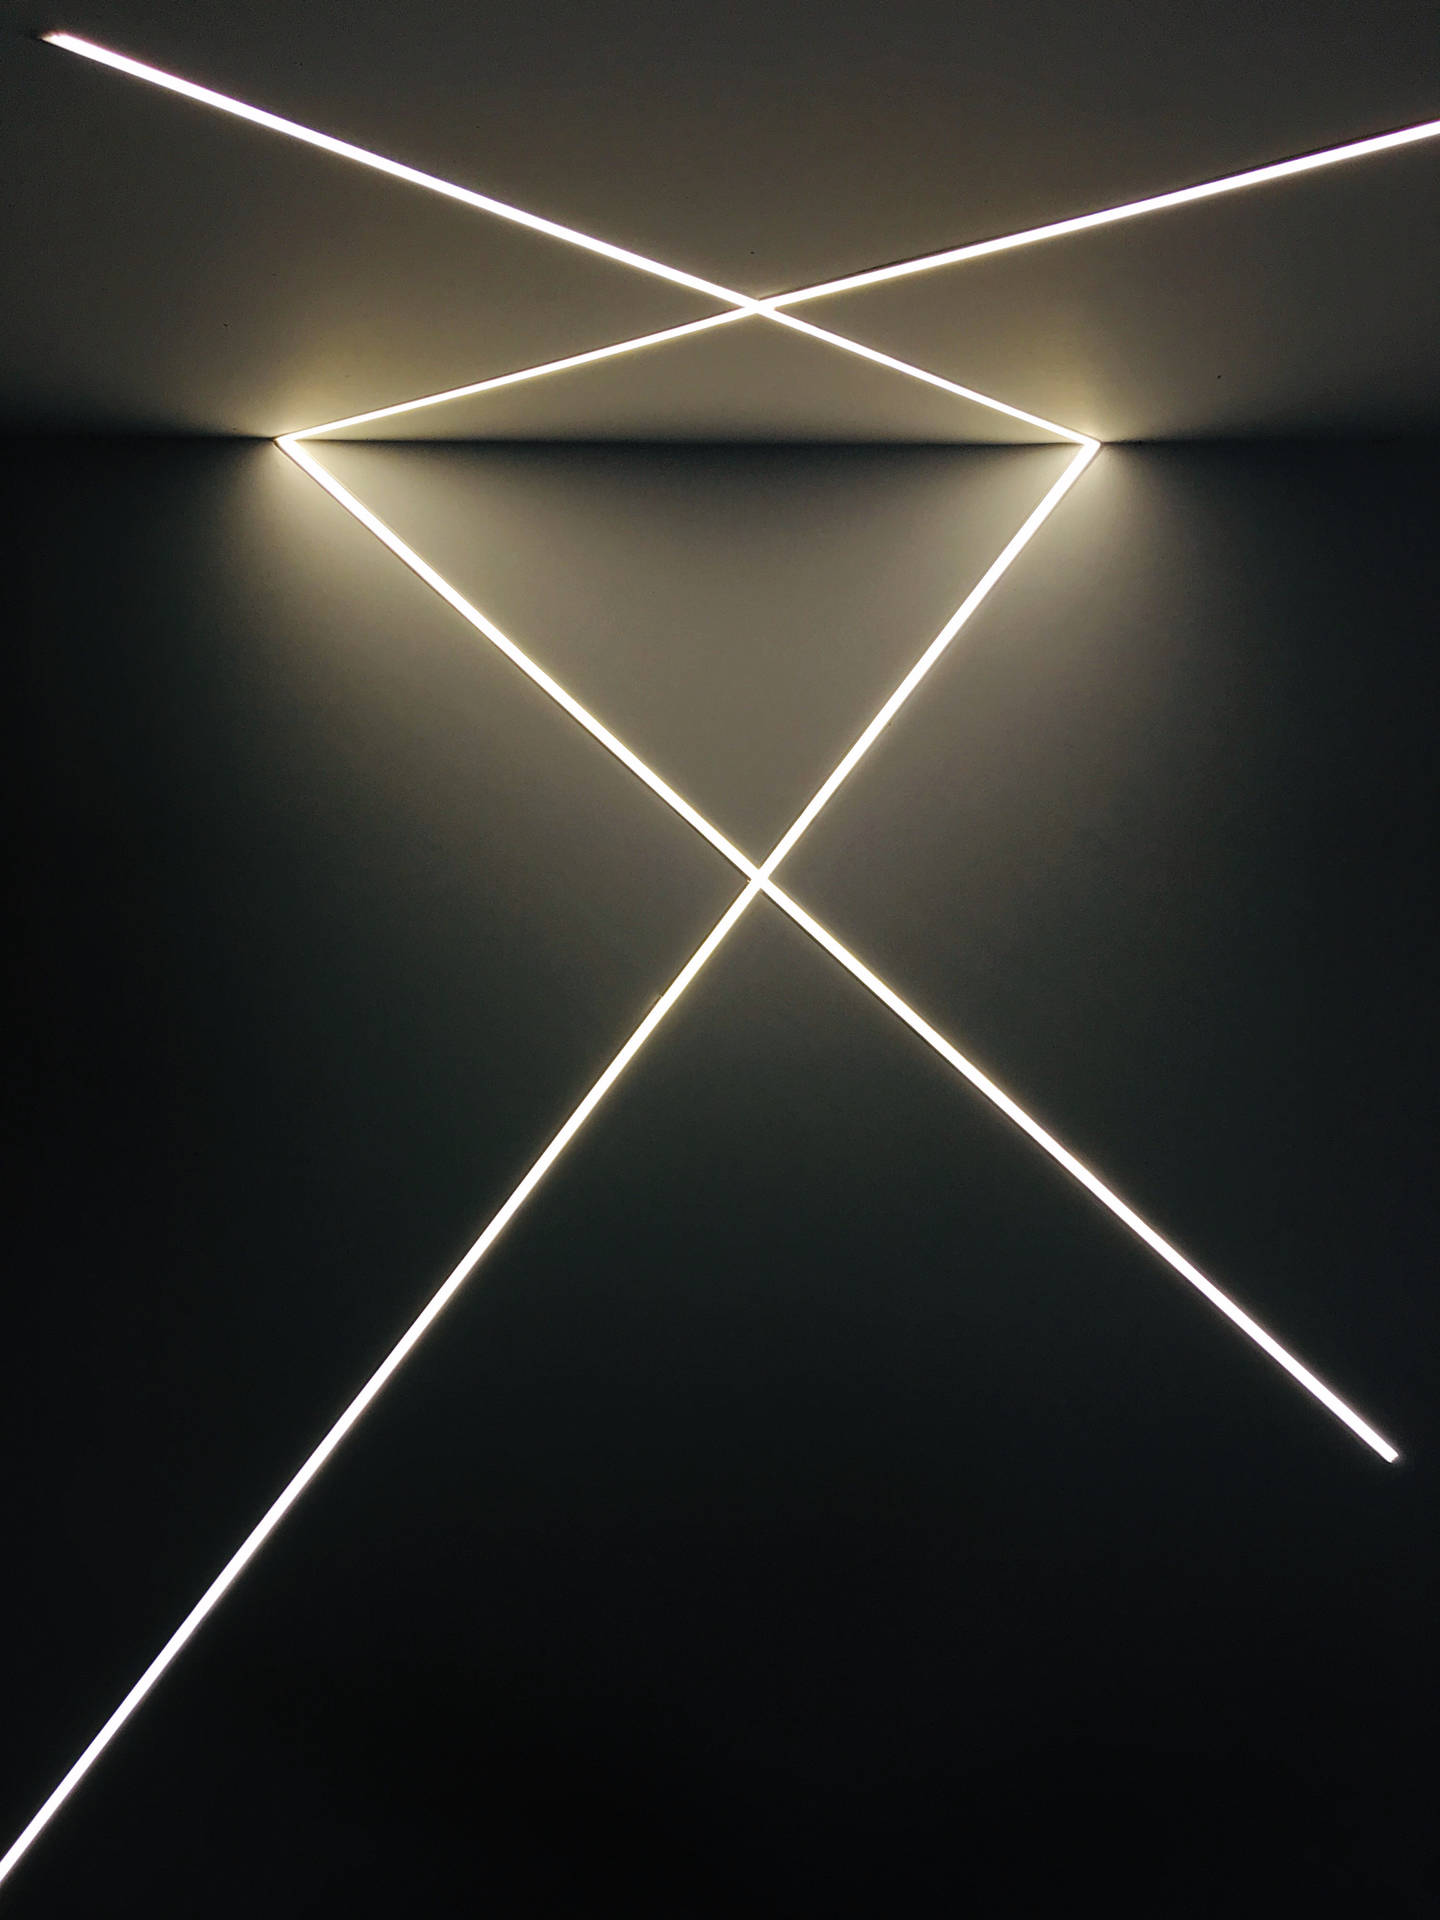 A Light Wall With Two Lines Of Light Wallpaper